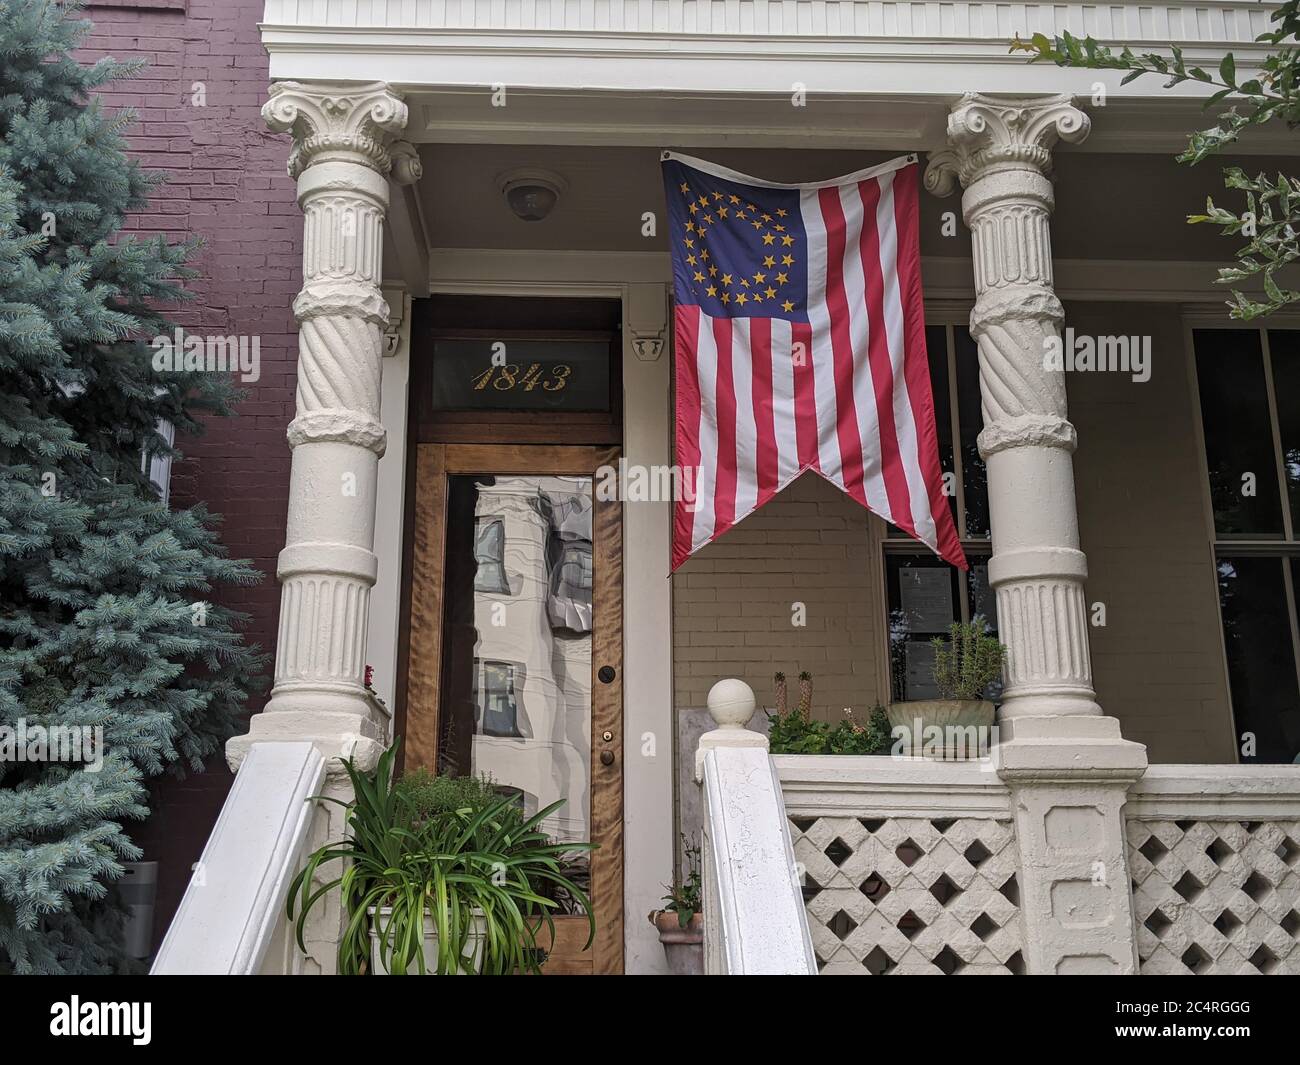 A U.S. cavalry guidon hangs on a porch on 12th street NW, In Shaw. Stock Photo